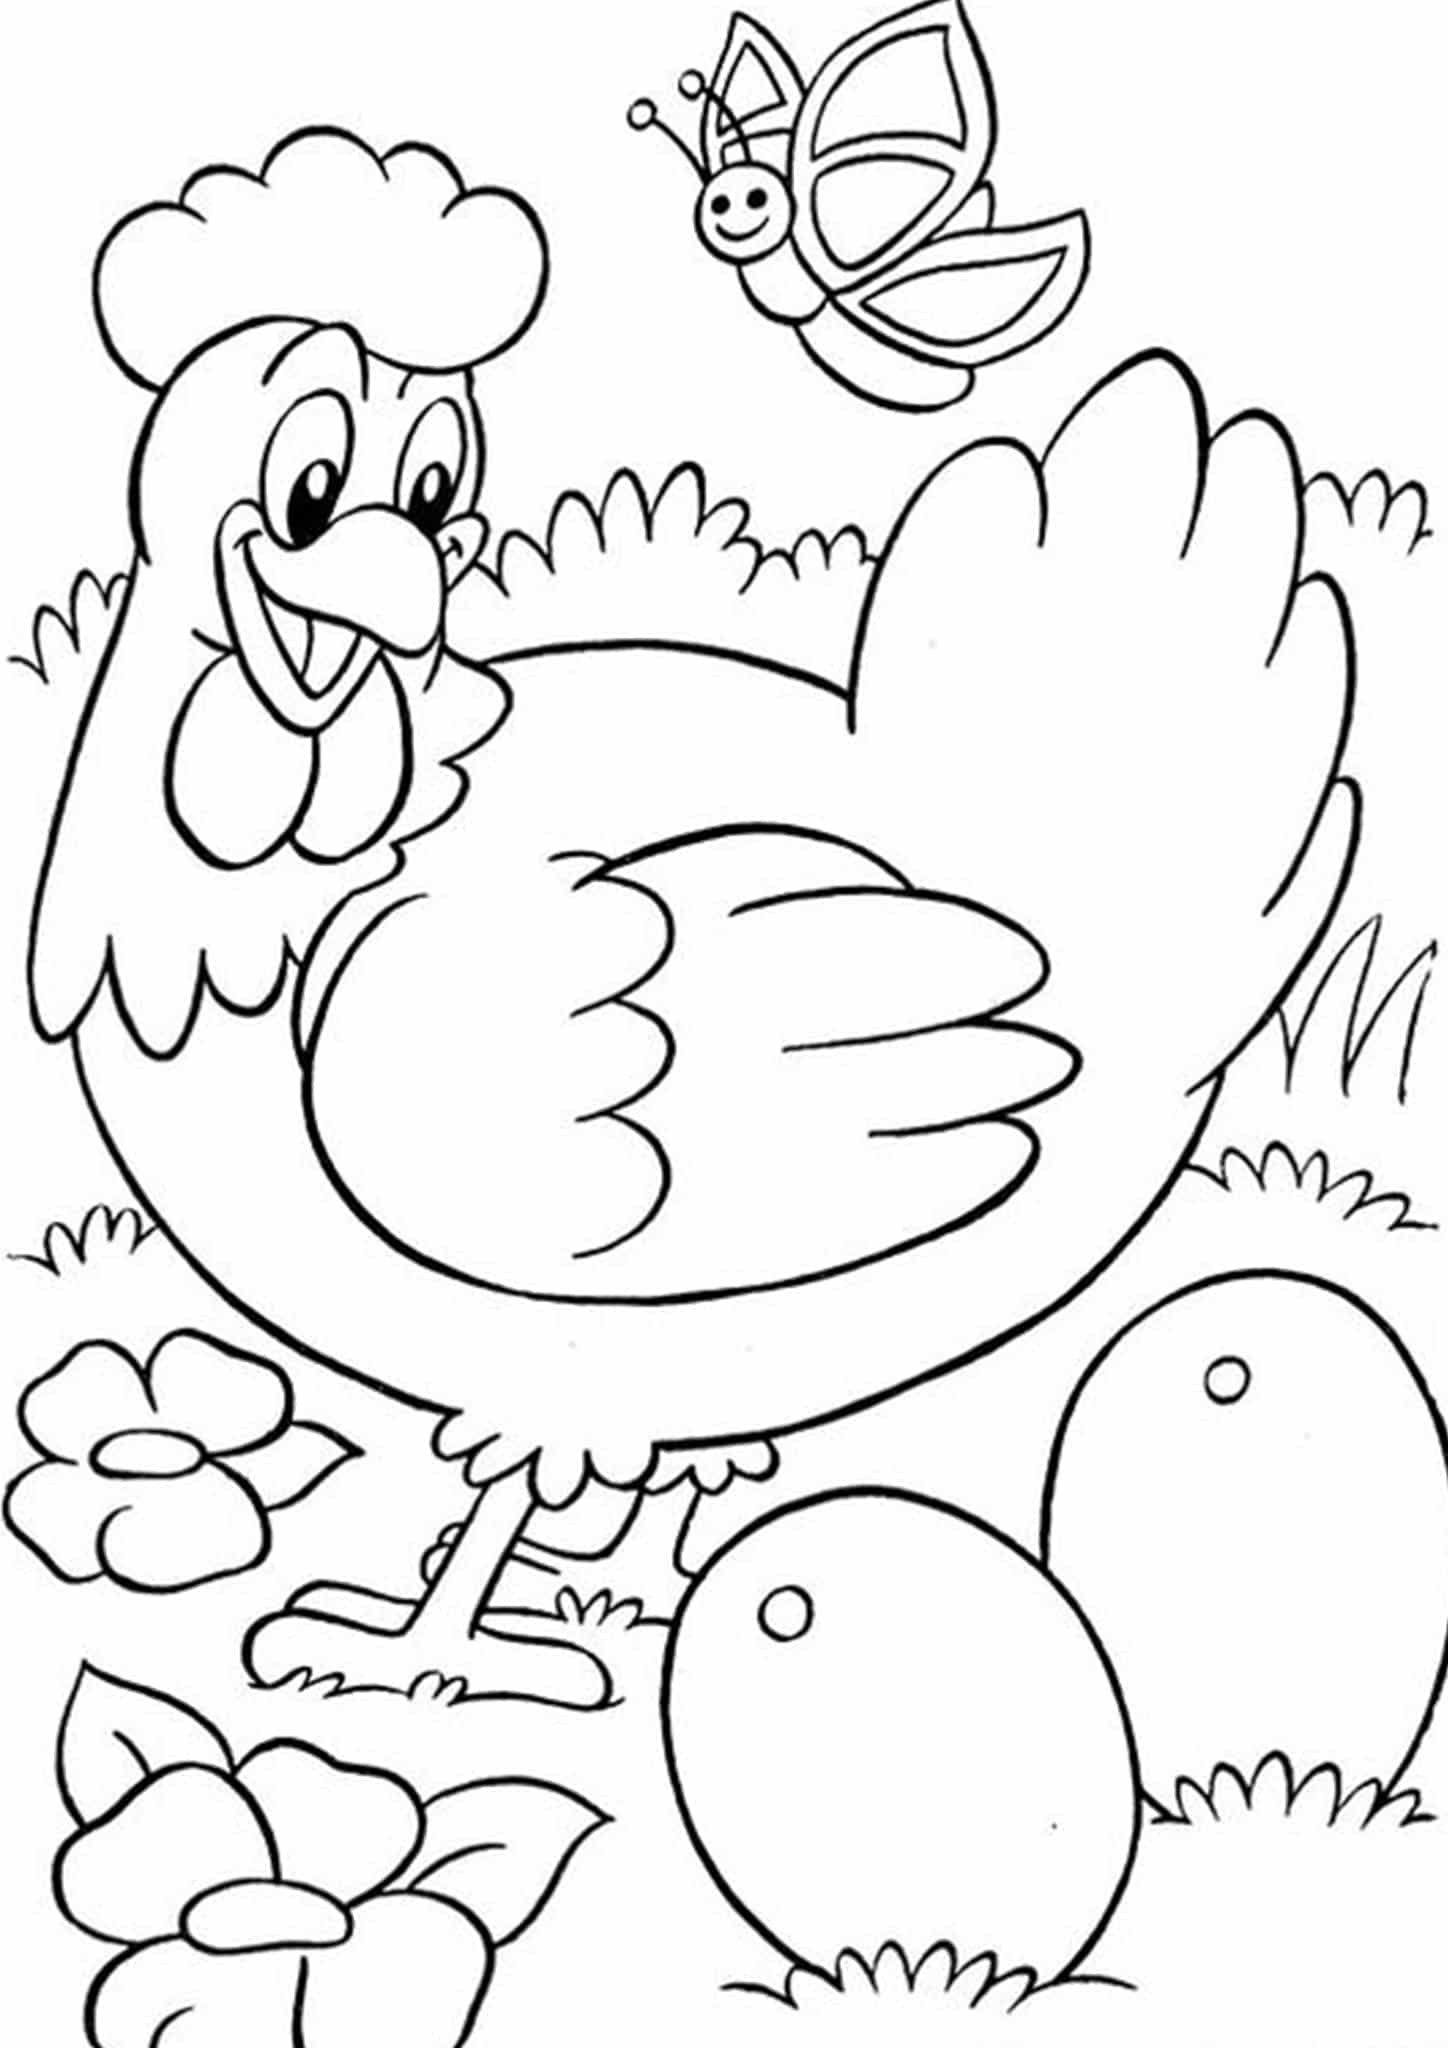 Download Free & Easy To Print Chicken Coloring Pages - Tulamama